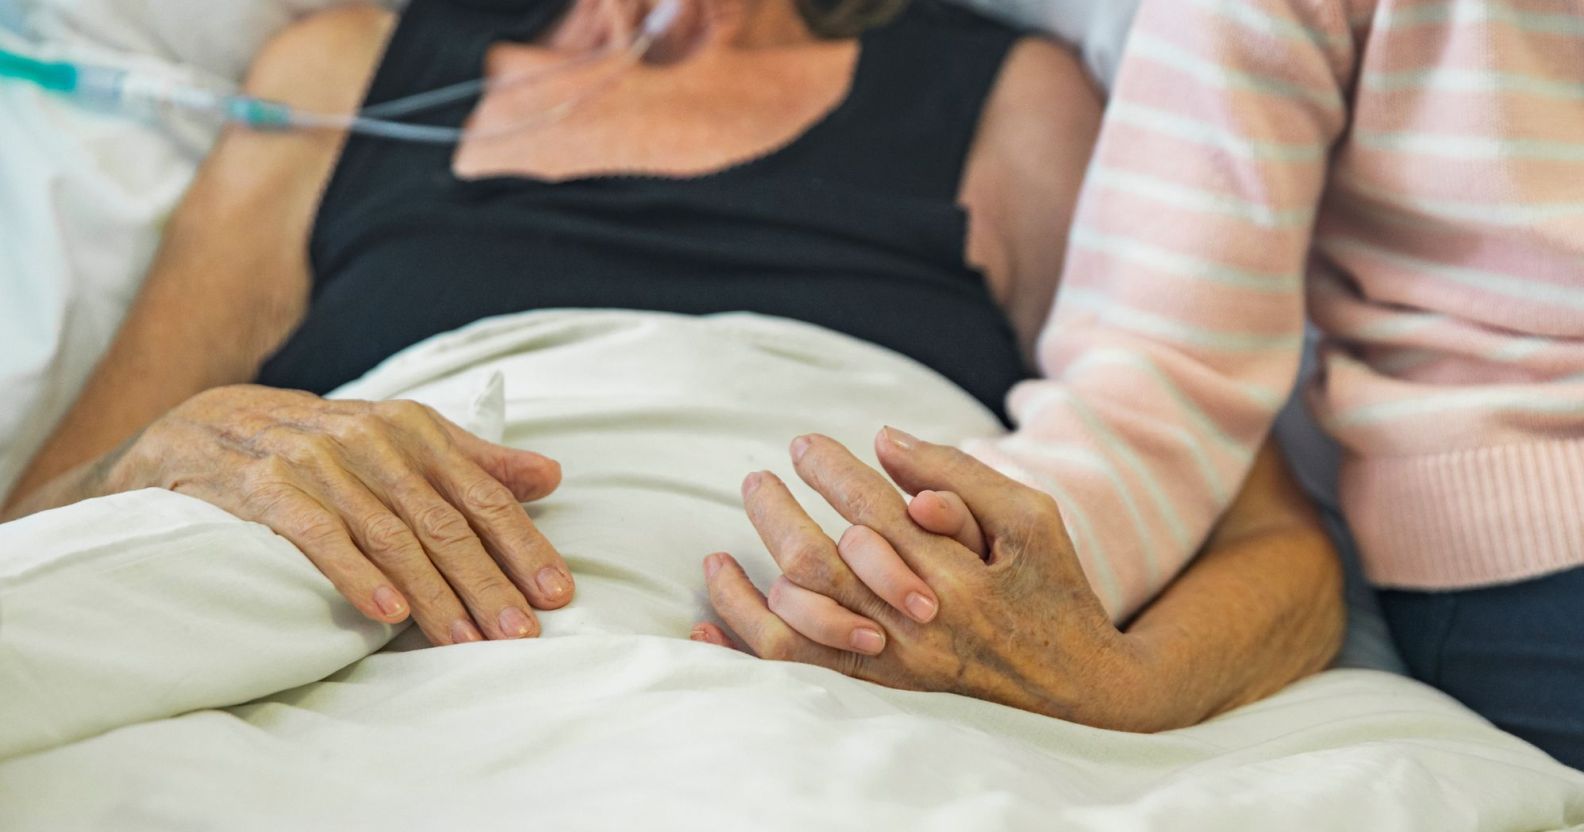 A bed-ridden person holds hands with a loved one.